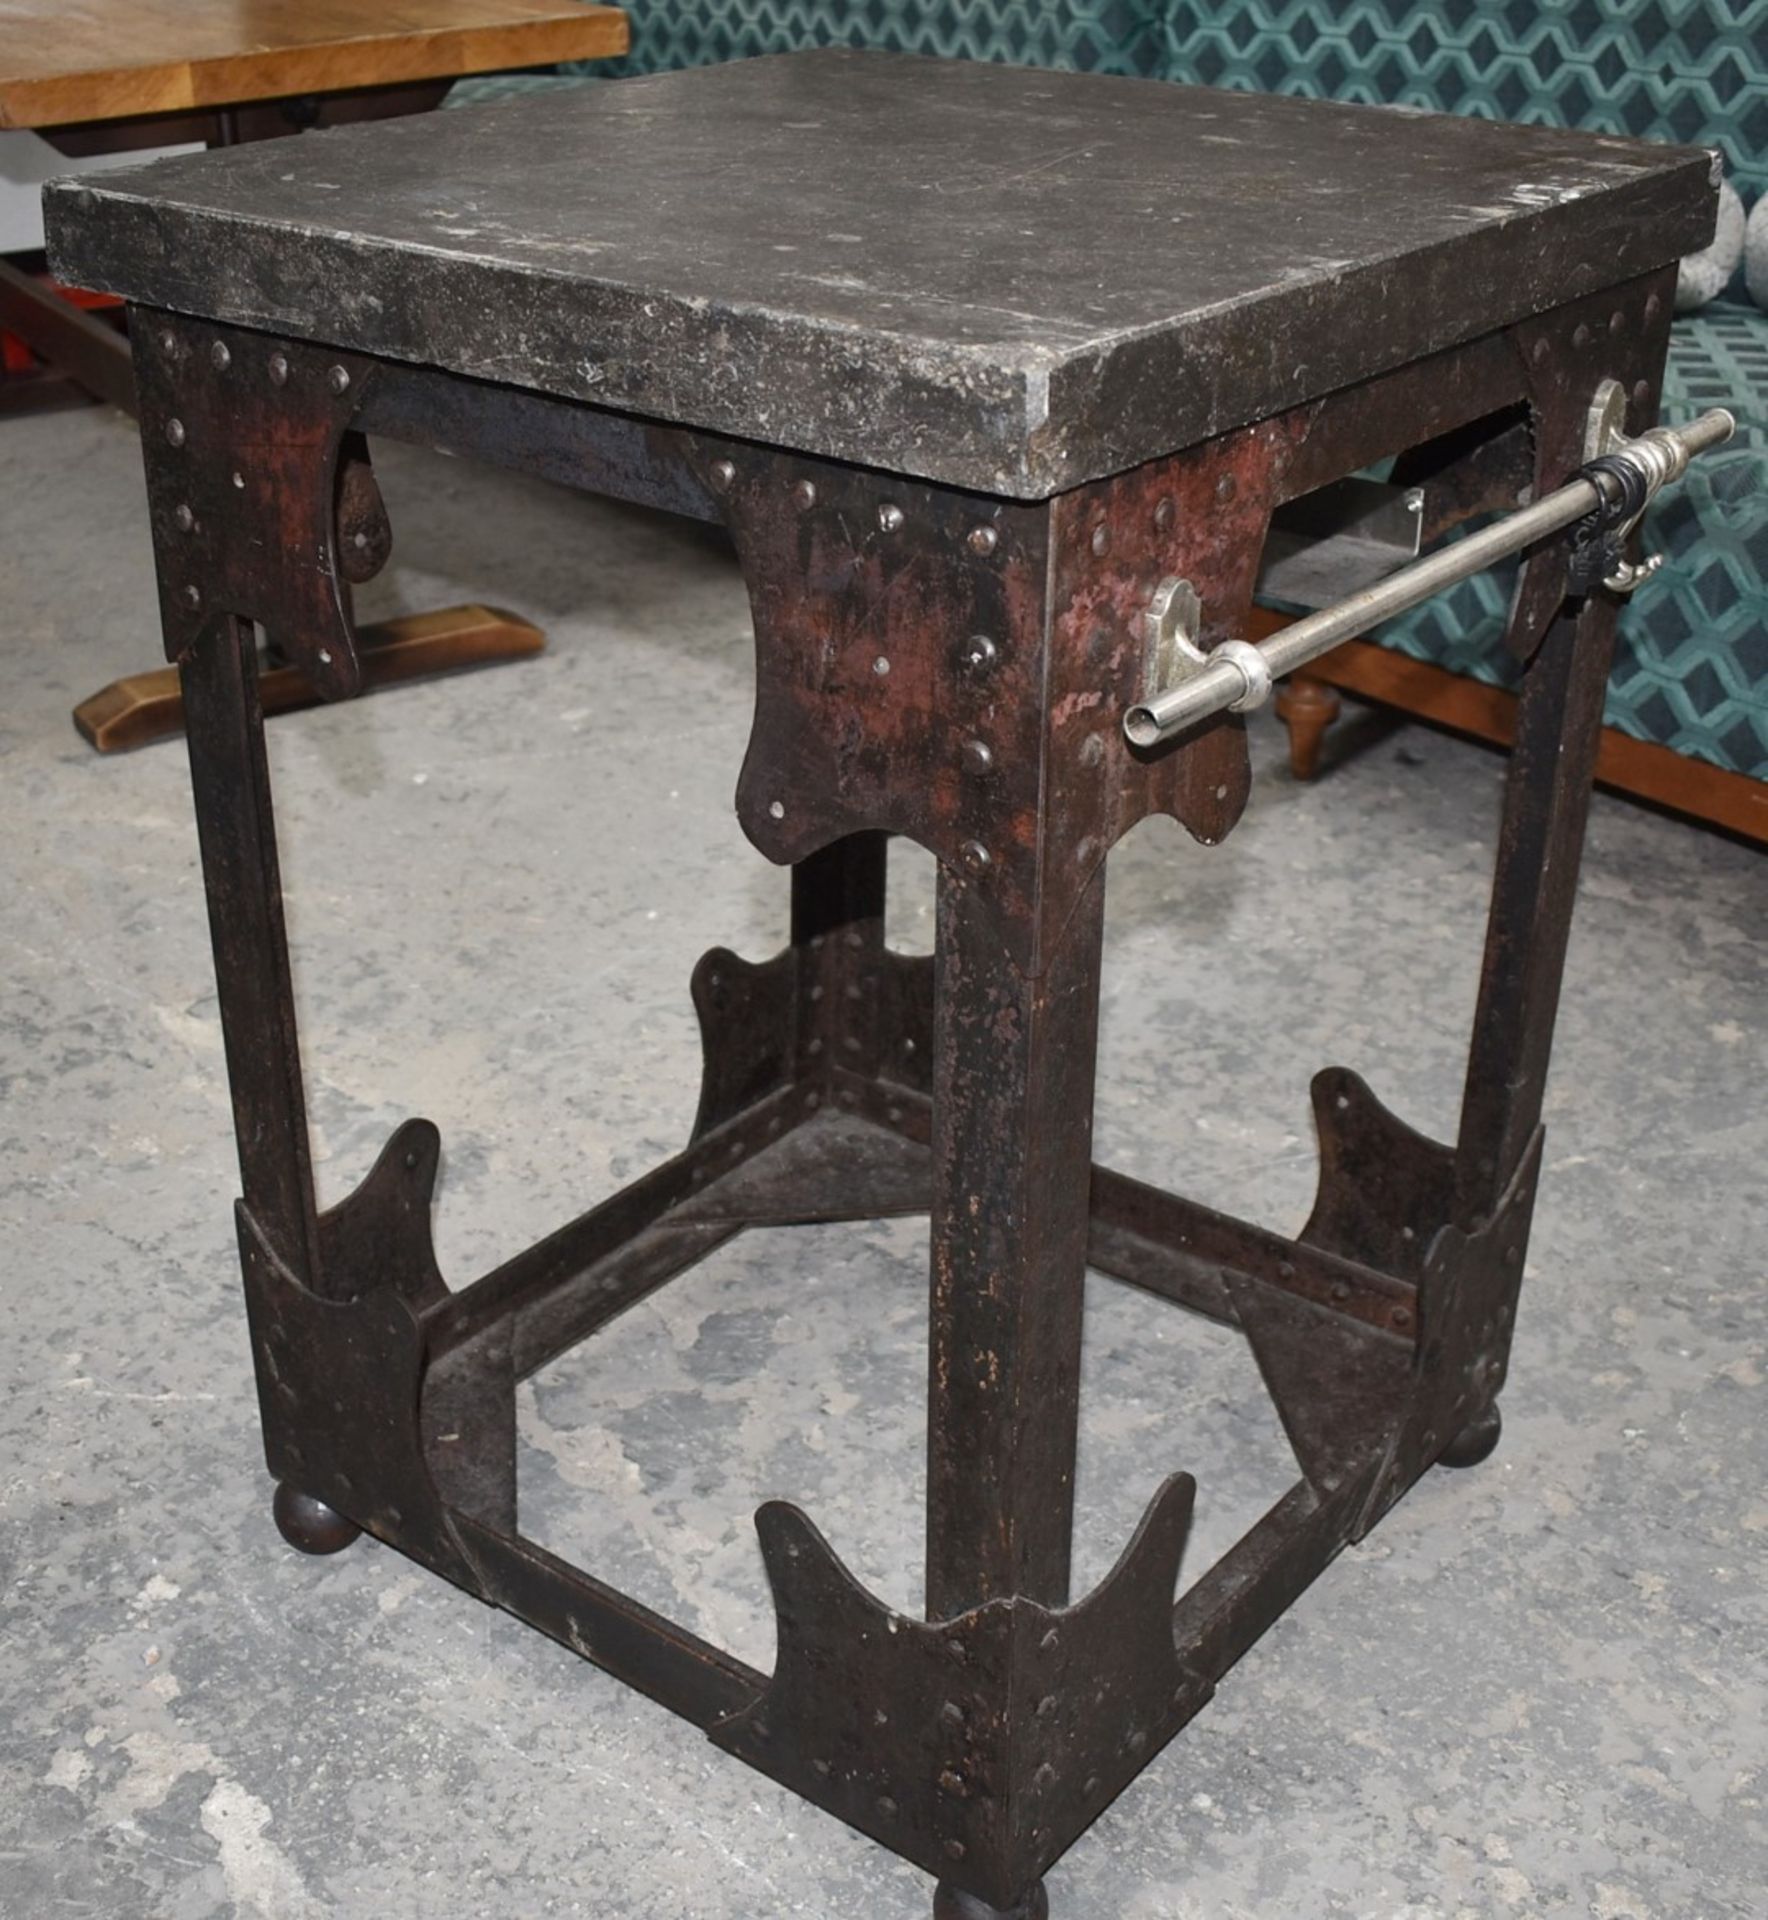 1 x Vintage Butchers Block With Riveted Steel Base, Utensil Hanging Rail and Heavy Stone Block Top - Image 3 of 11